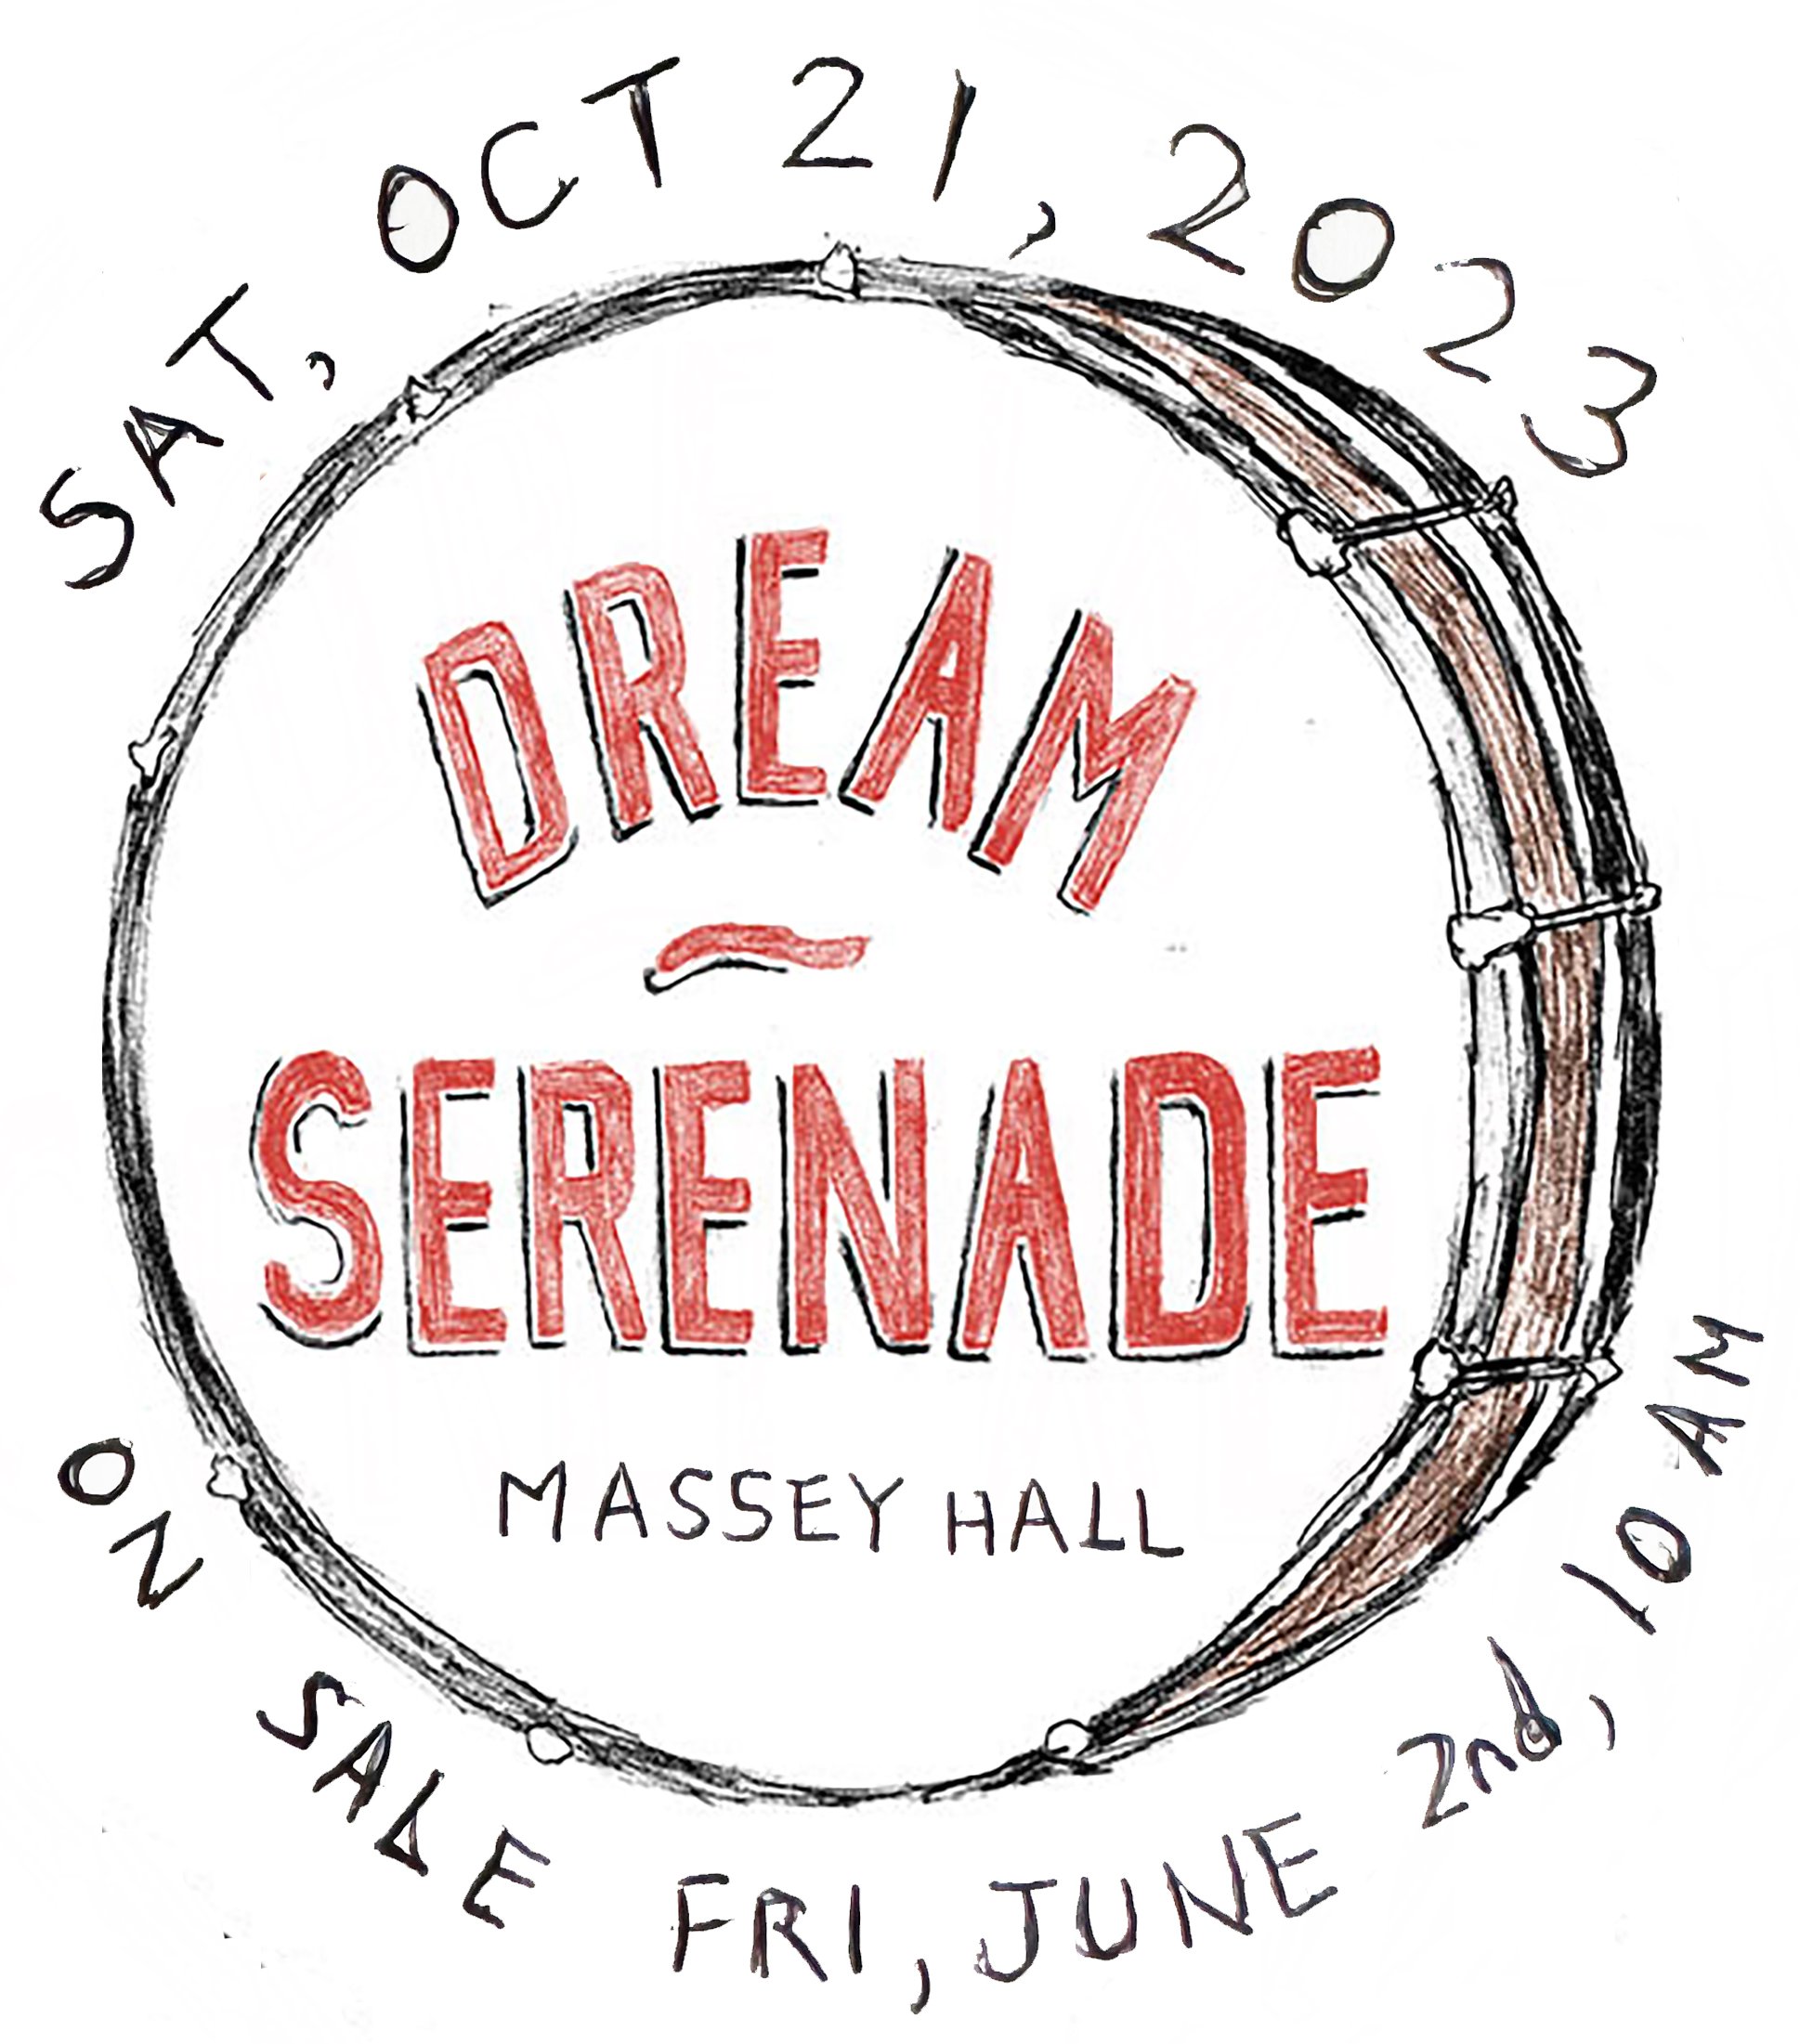 2023 Dream Serenade drum with ticket on sale date listed